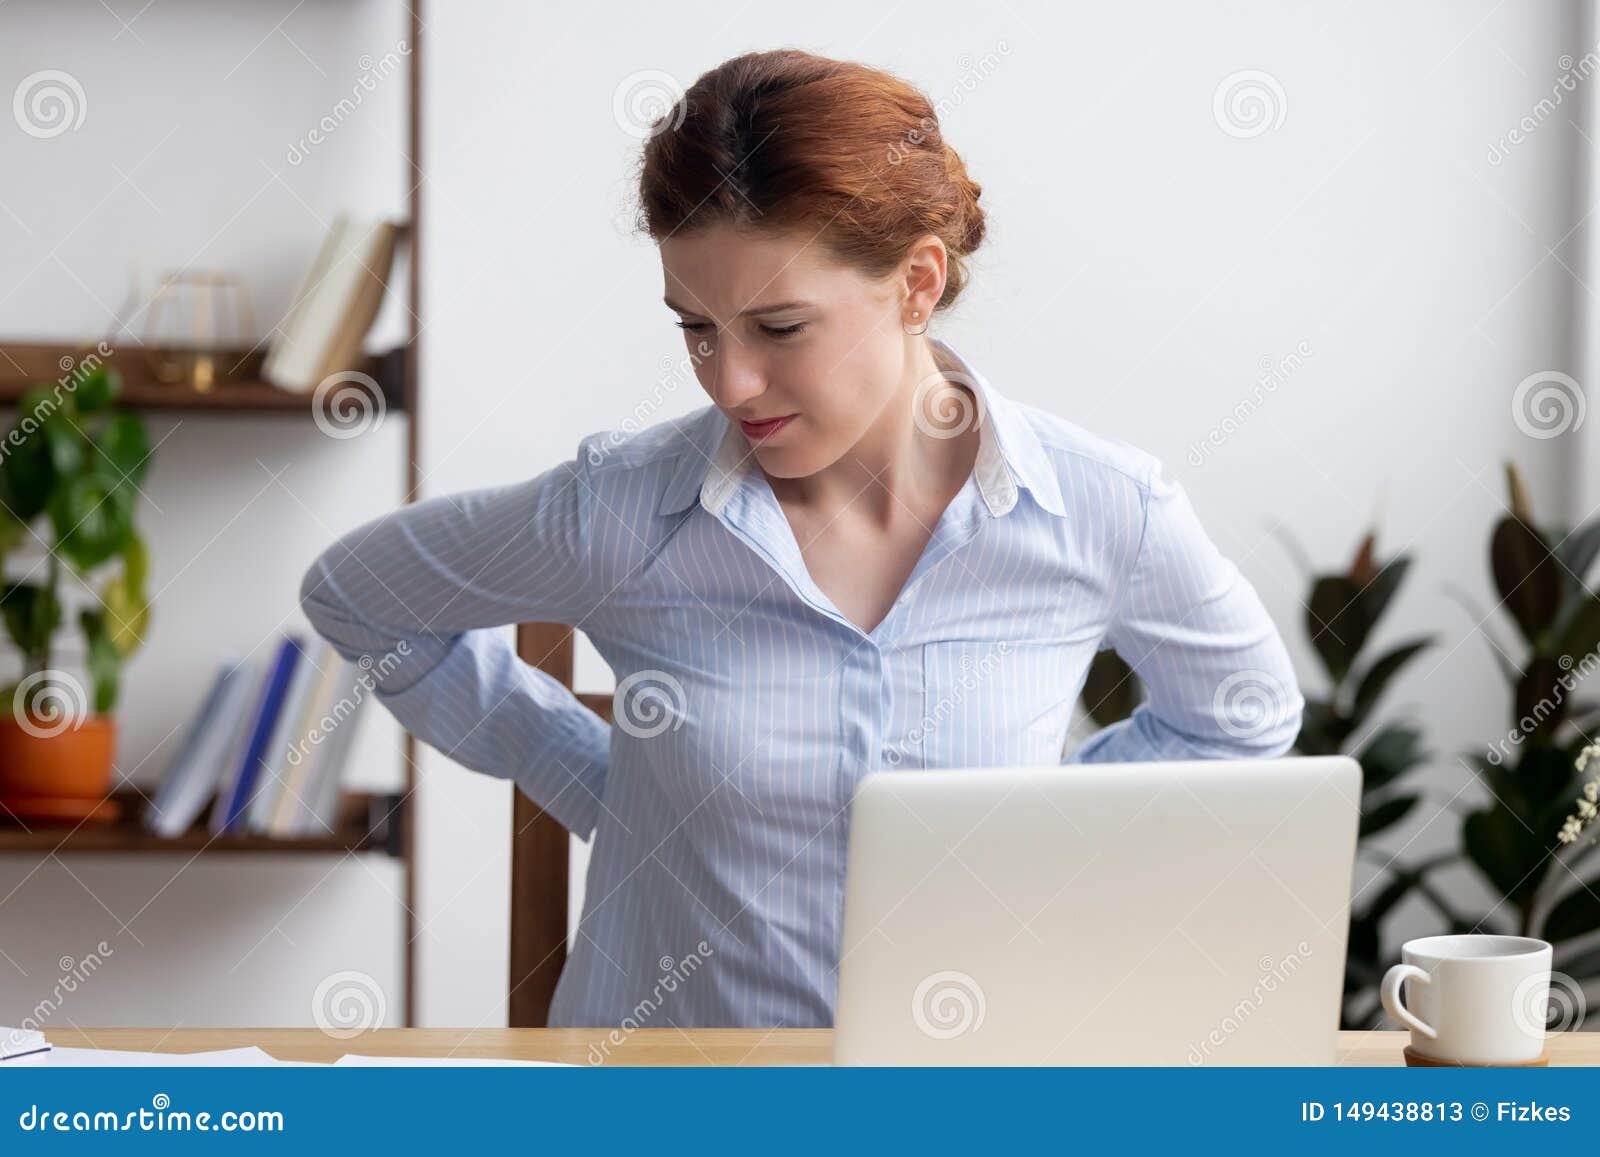 Businesswoman Feeling Back Pain Sitting On Chair Touching Aching